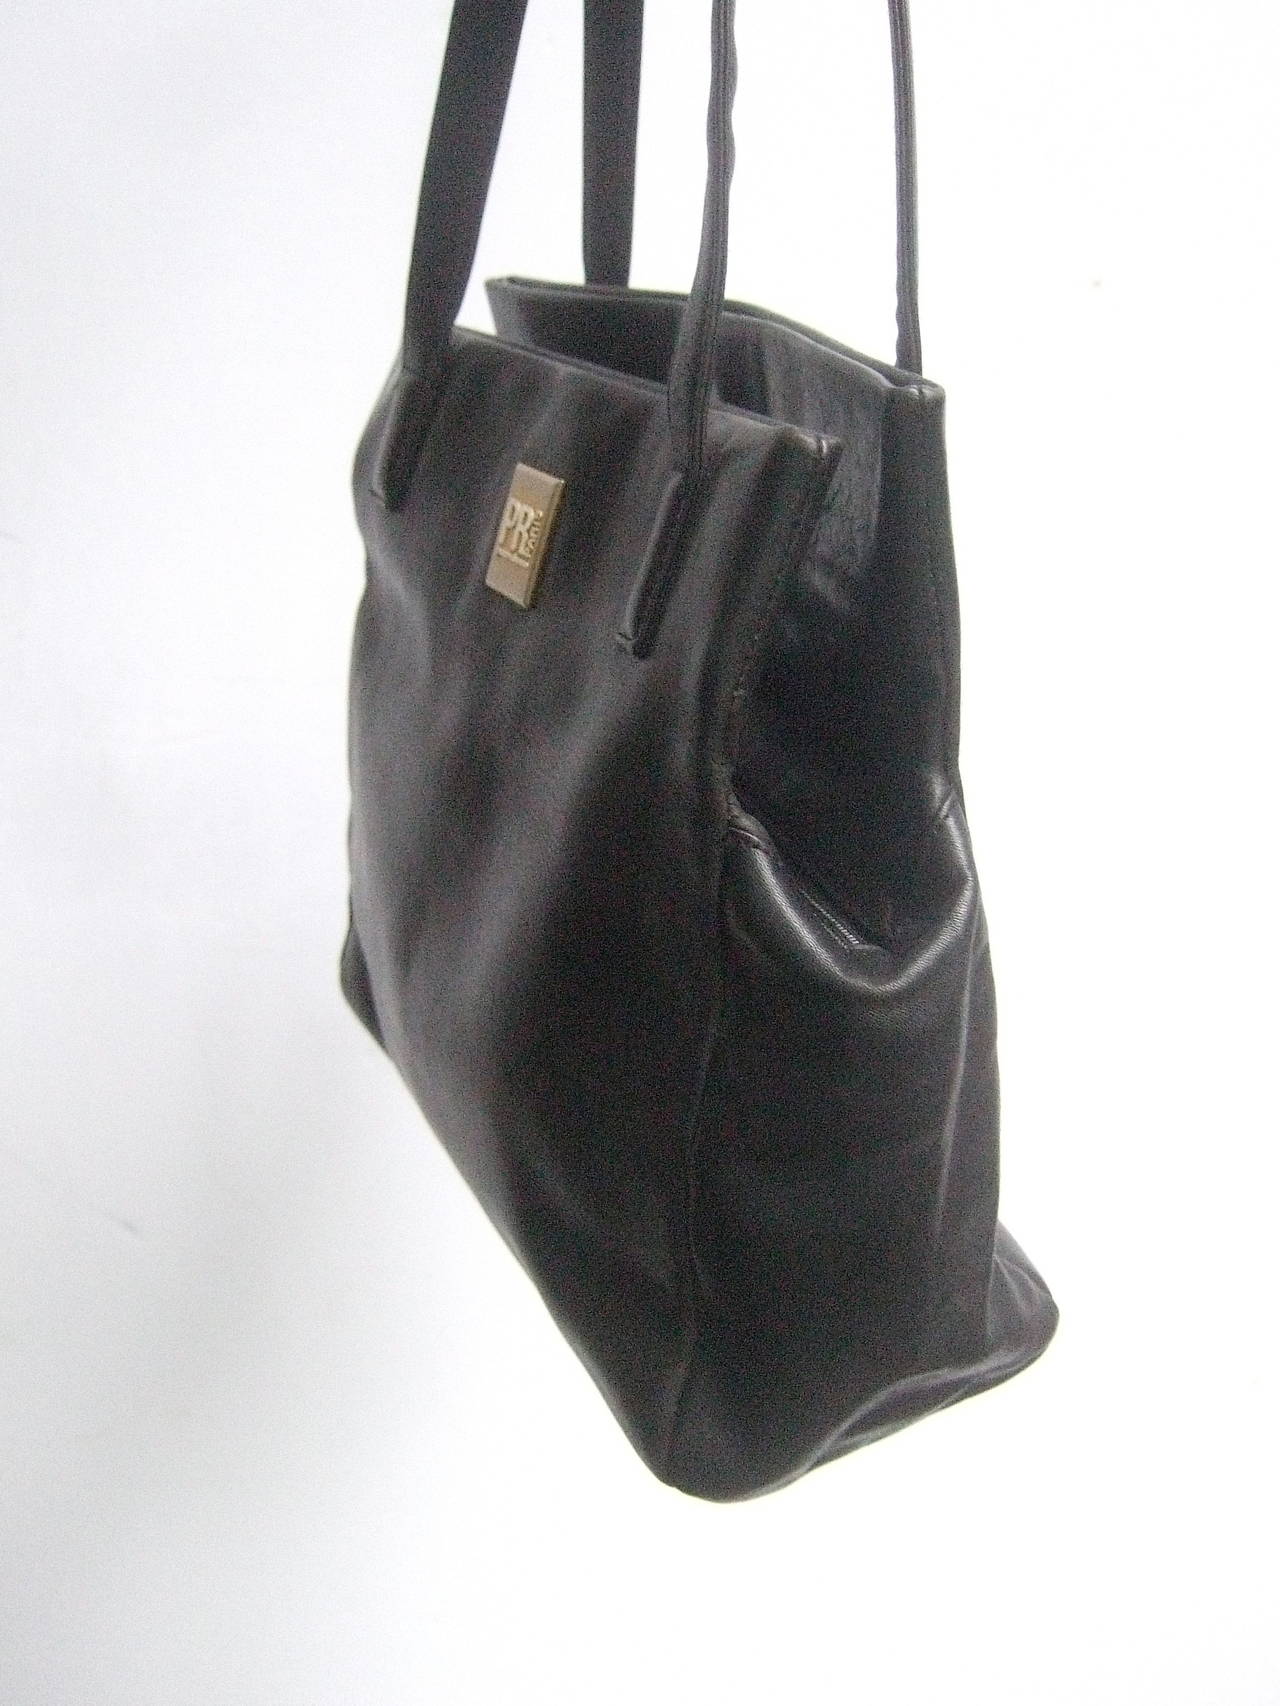 Paco Rabanne Paris Black Leather Shoulder Bag 1980s In Good Condition For Sale In University City, MO